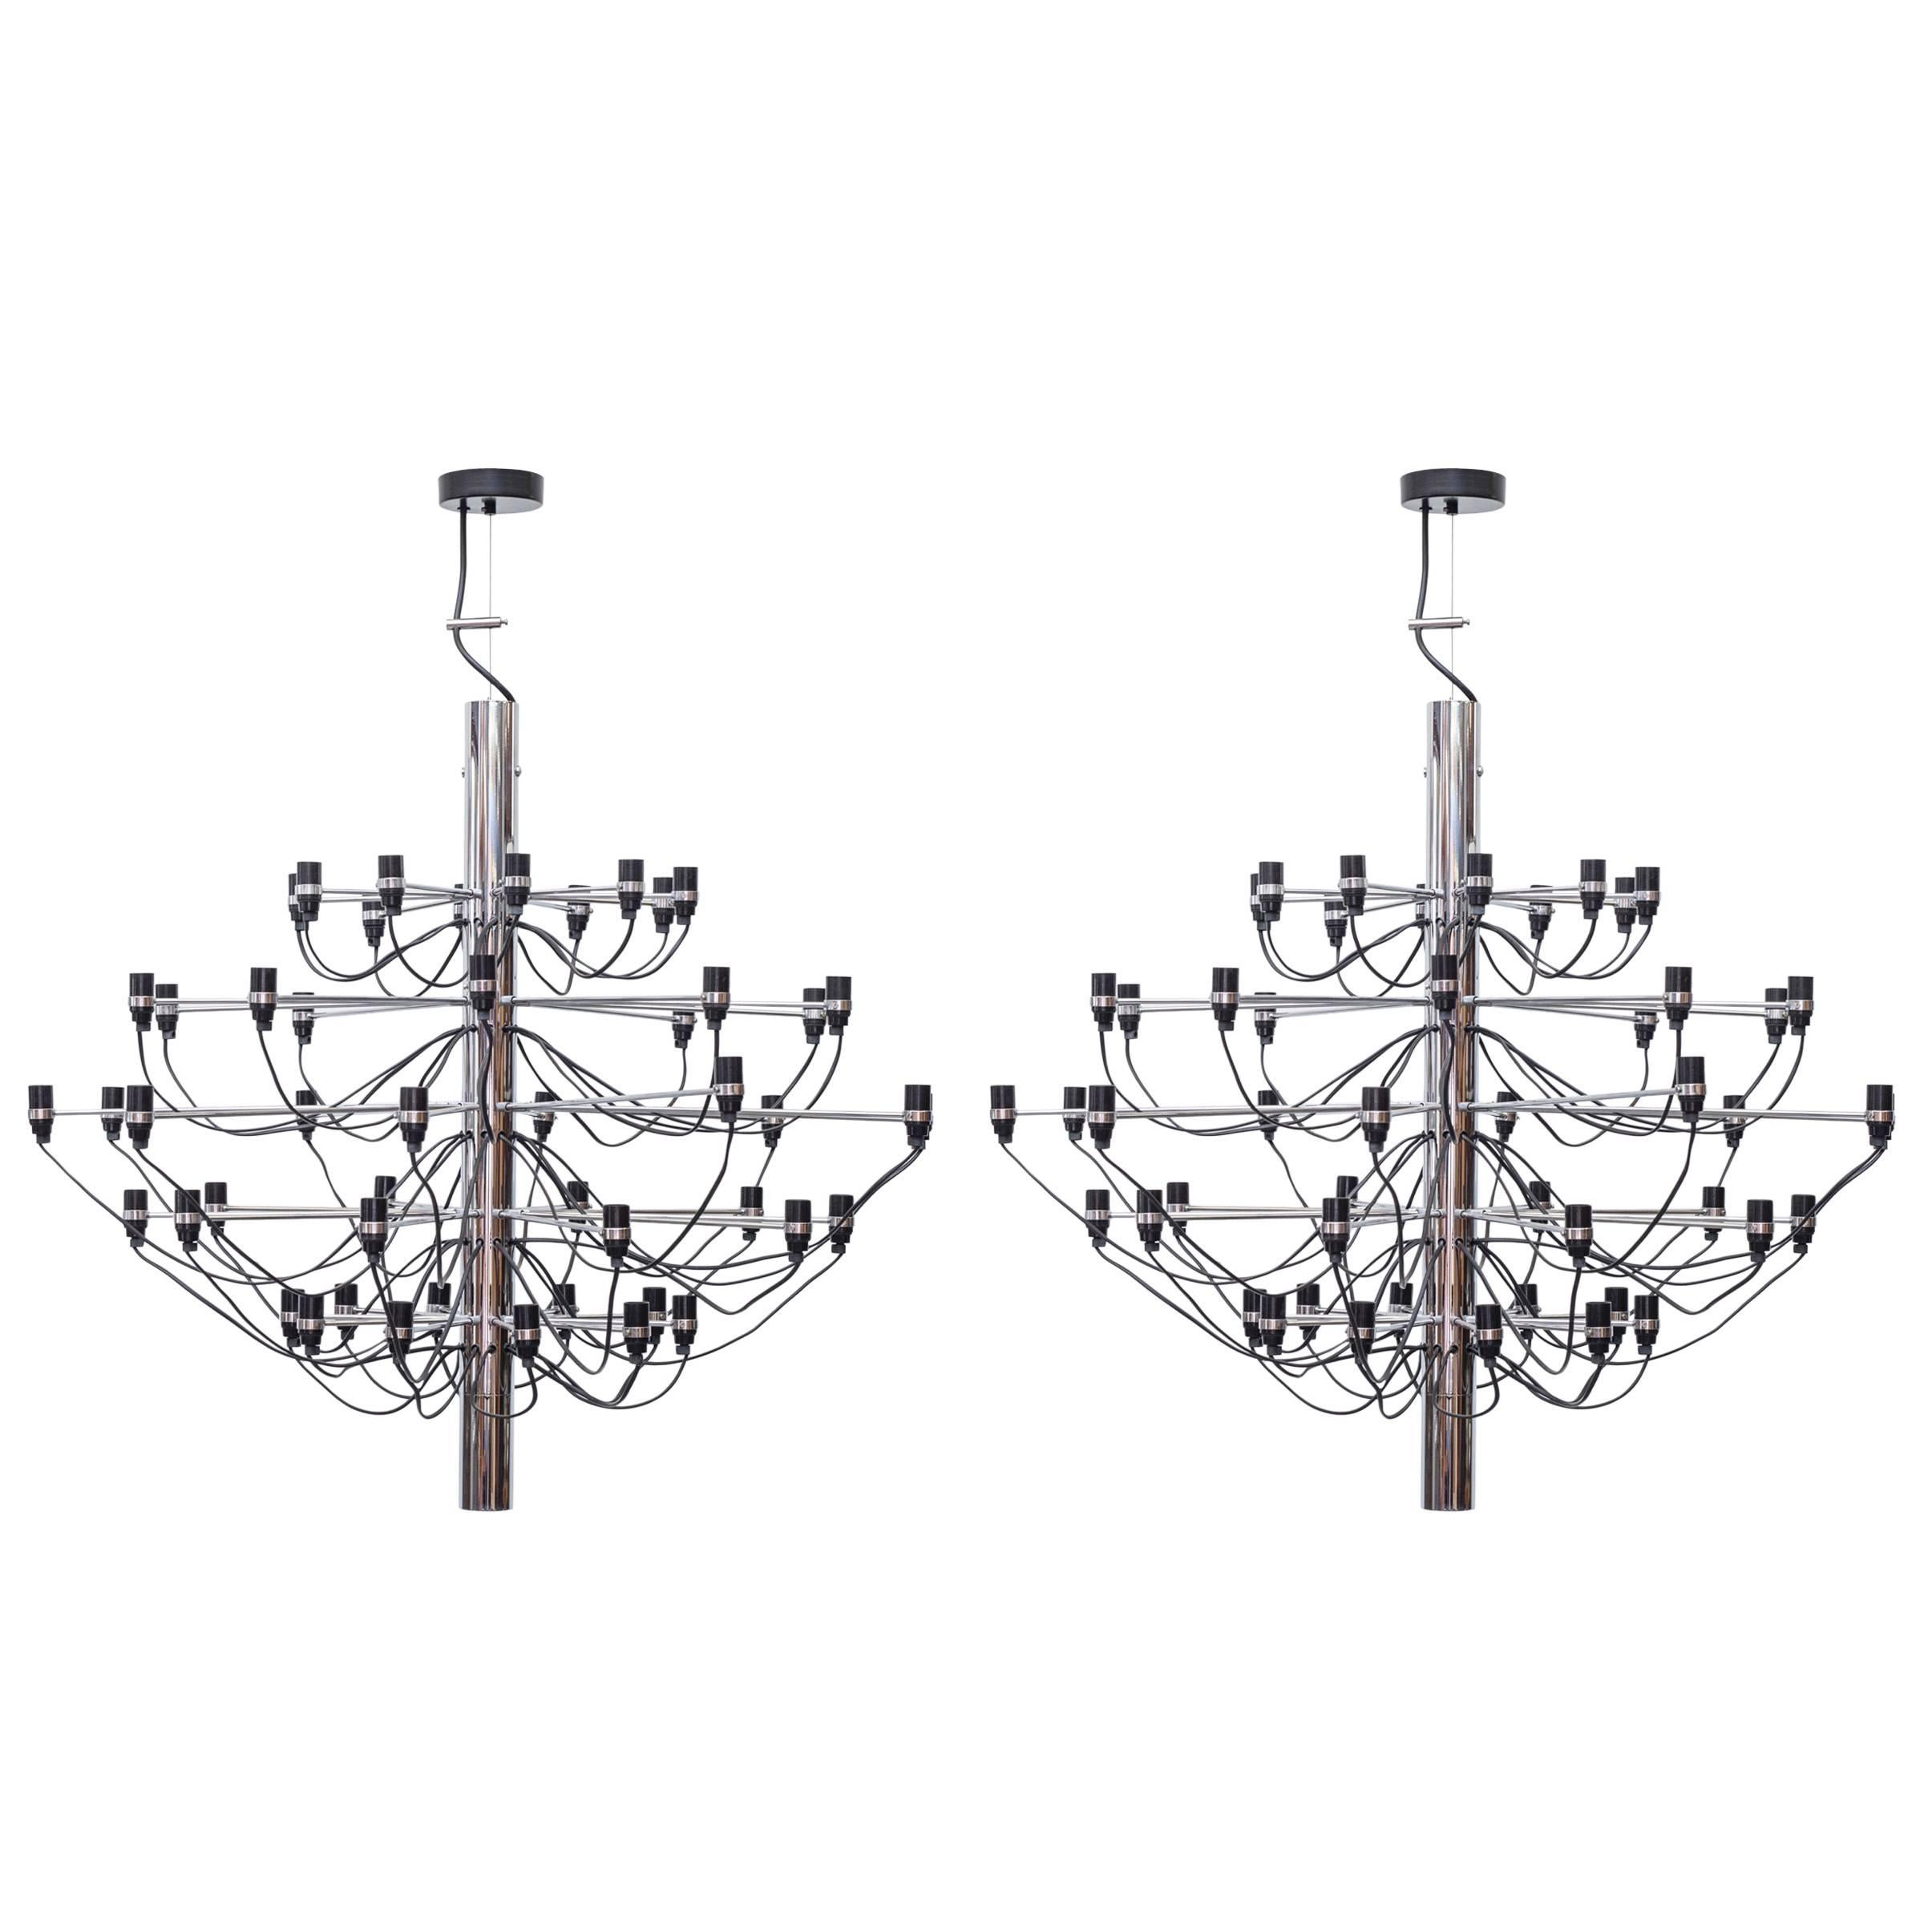 Pair of Gino Sarfatti Designed '2097' Chrome 50 Bulb Chandeliers for Flos, Italy